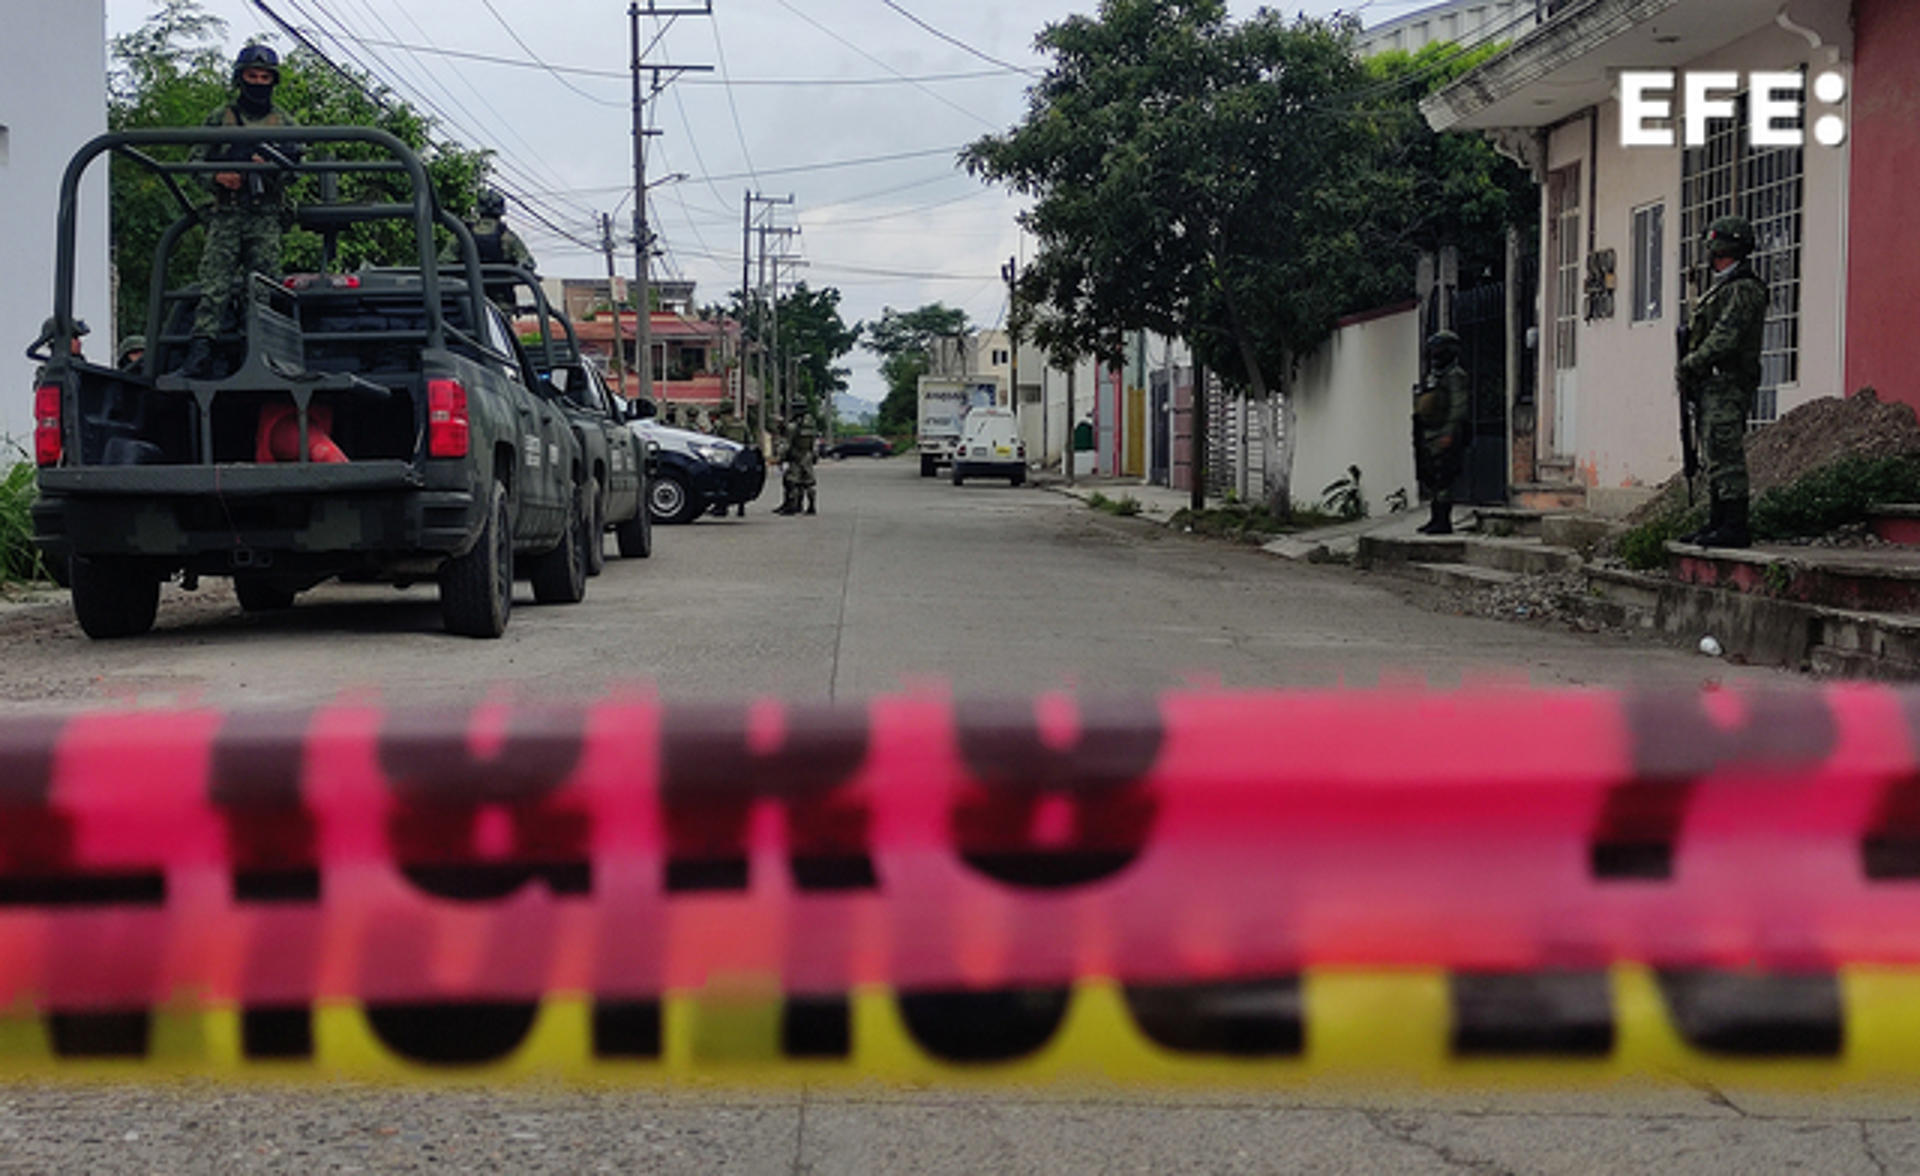 Army troops secure the scene in Poza Rica, Mexico, on 14 August 2023, the day after dozens of dismembered bodies were found in residences used as safe houses by criminal organizations. EFE/Edgar Escamilla